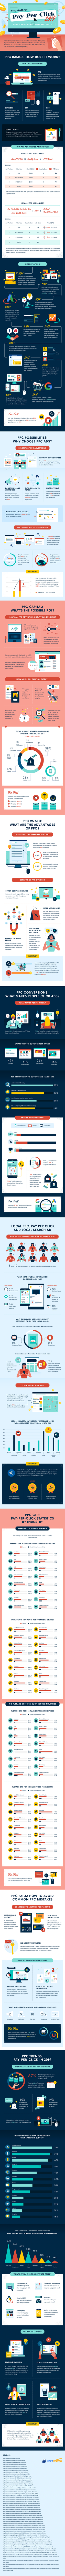 PPC Stats and Marketing Trends for 2019 [Infographic]